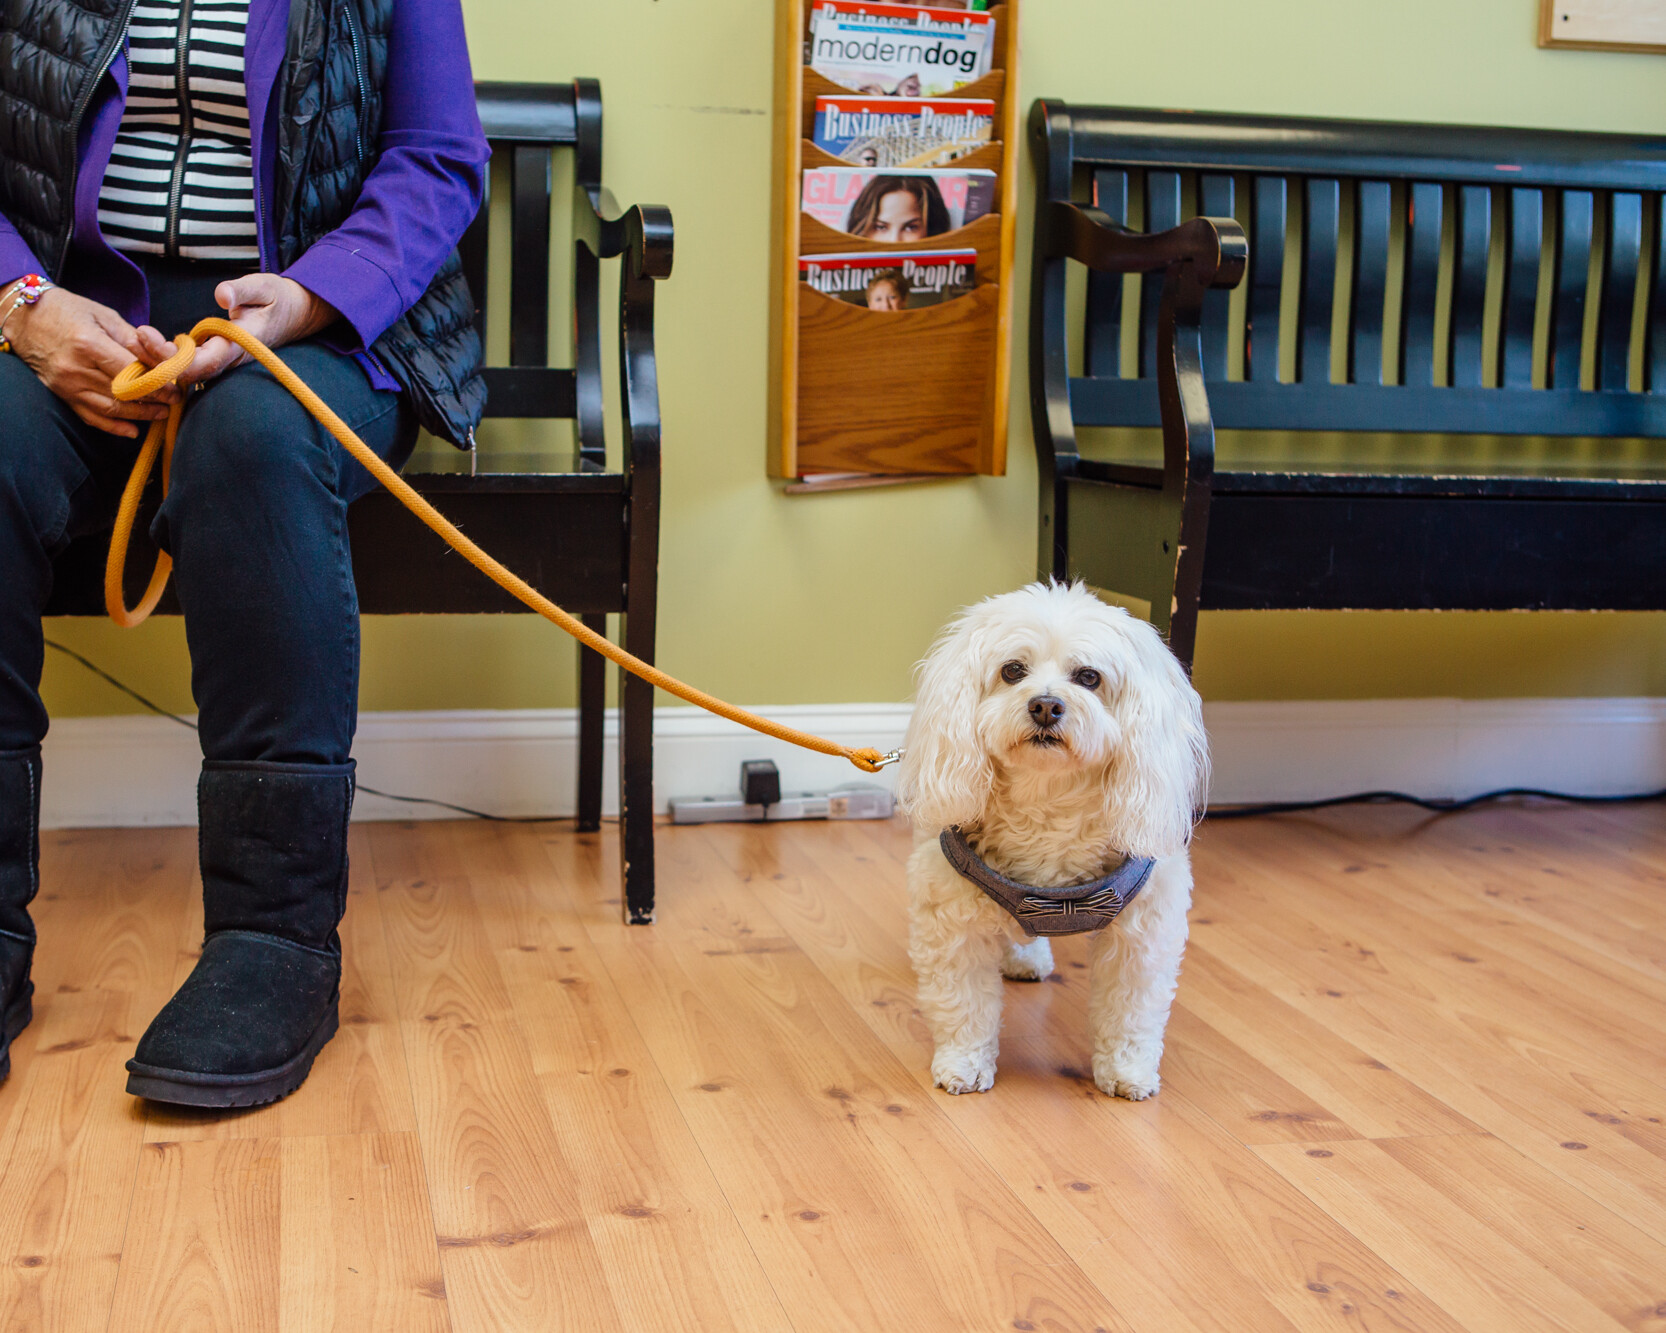 Small White Dog on an Orange Leash Standing in the Qi Veterinary Clinic Lobby 